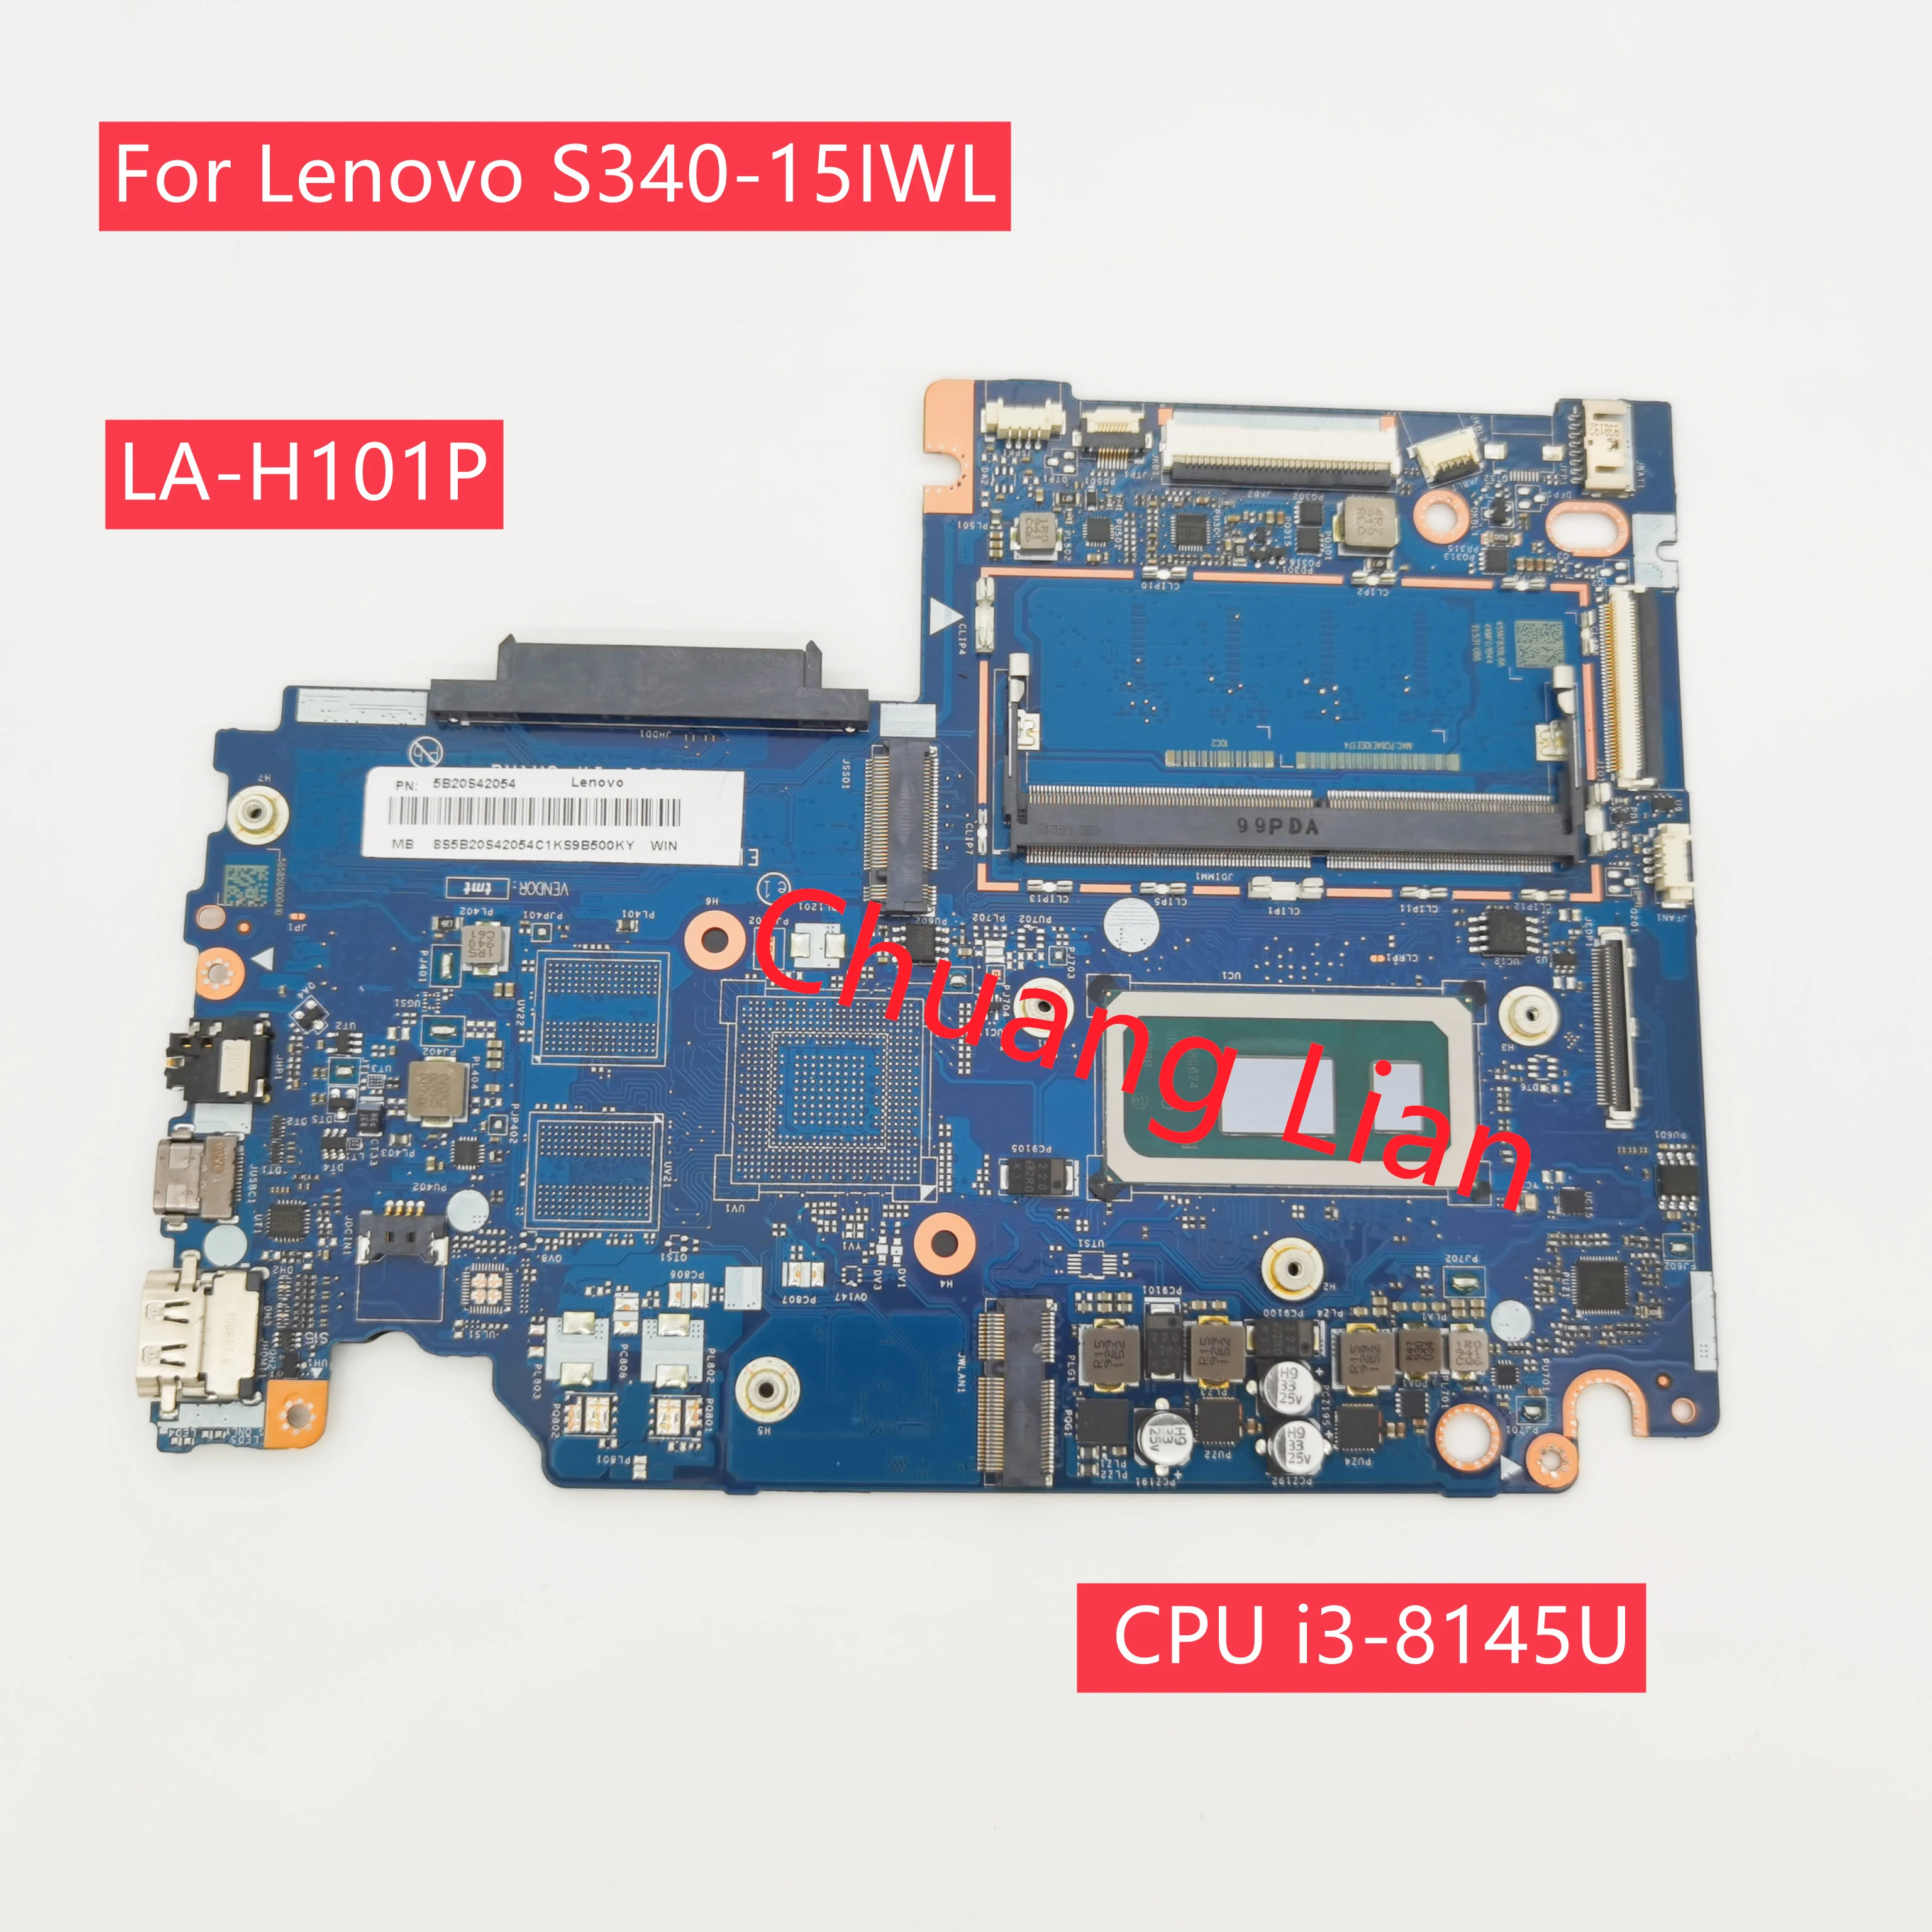 latest motherboard for desktop For Lenovo S340-14IWL S340-15IWL laptop motherboard  LA-H101P with CPU i3-8145U  UMA 4GB DDR4  FRU 5B20S42034 100% Fully Tested best chipset for gaming pc